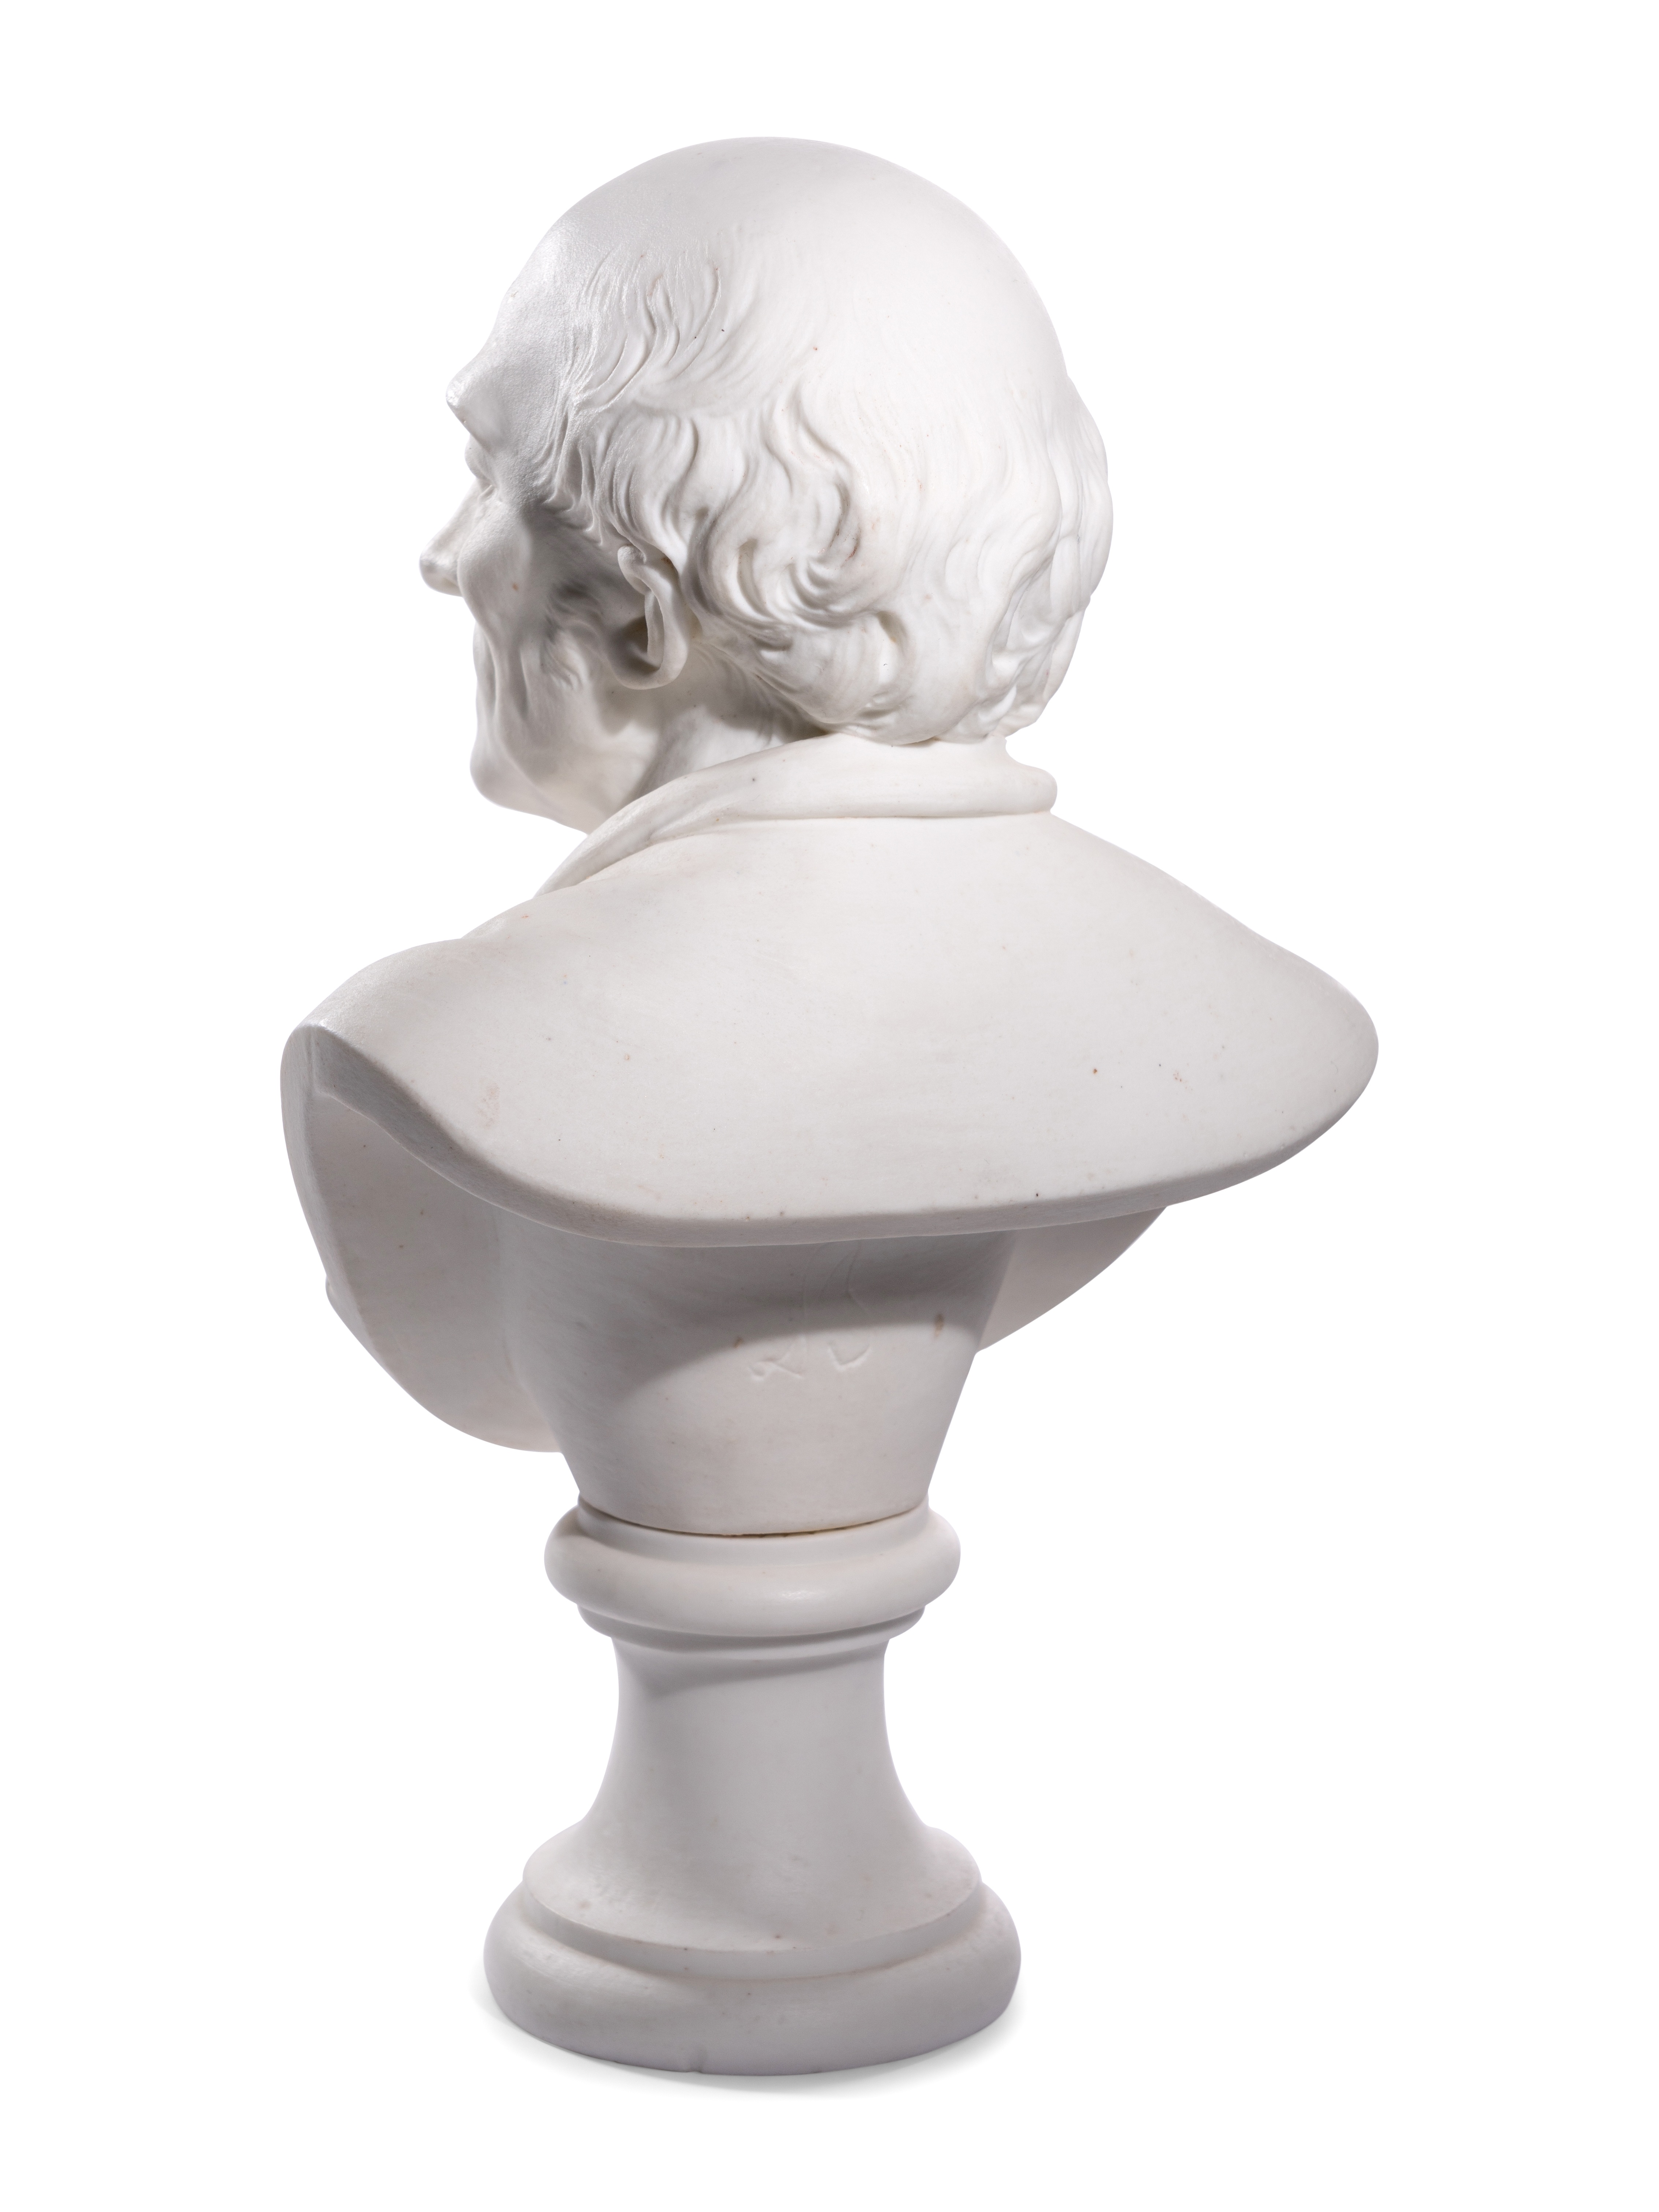 A French Biscuit Porcelain Bust of Fran'cois-Marie Arouet, Called Voltaire - Image 9 of 20